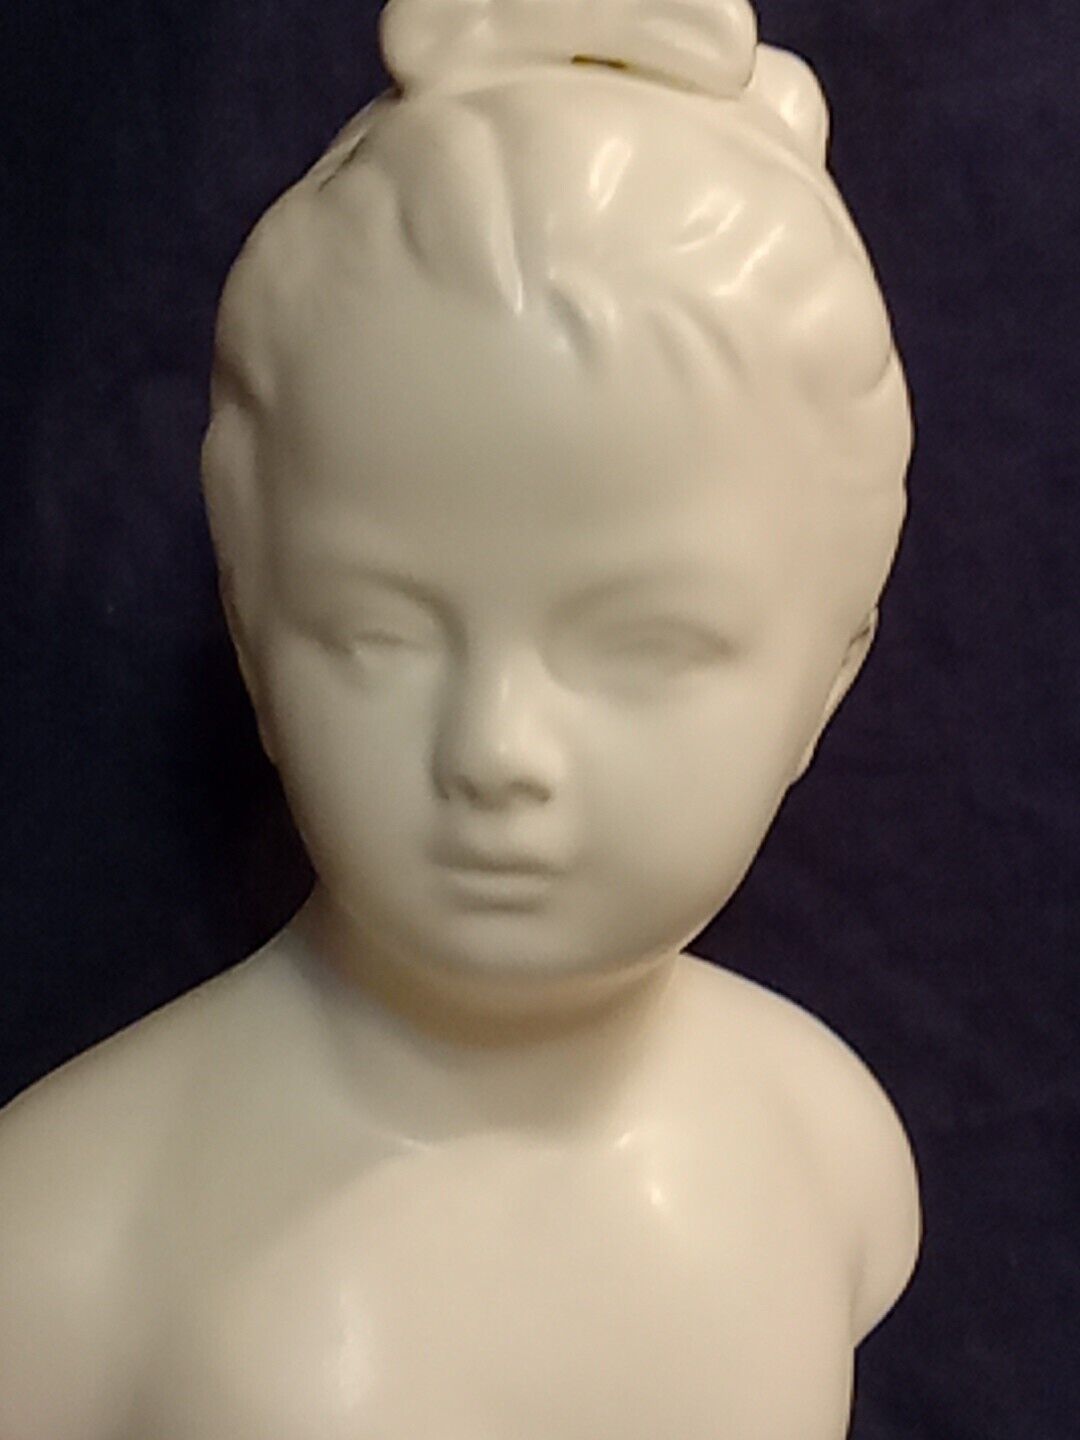 Vintage Napcoware White Ceramic Young Girl Child Bust Figurine Statue 